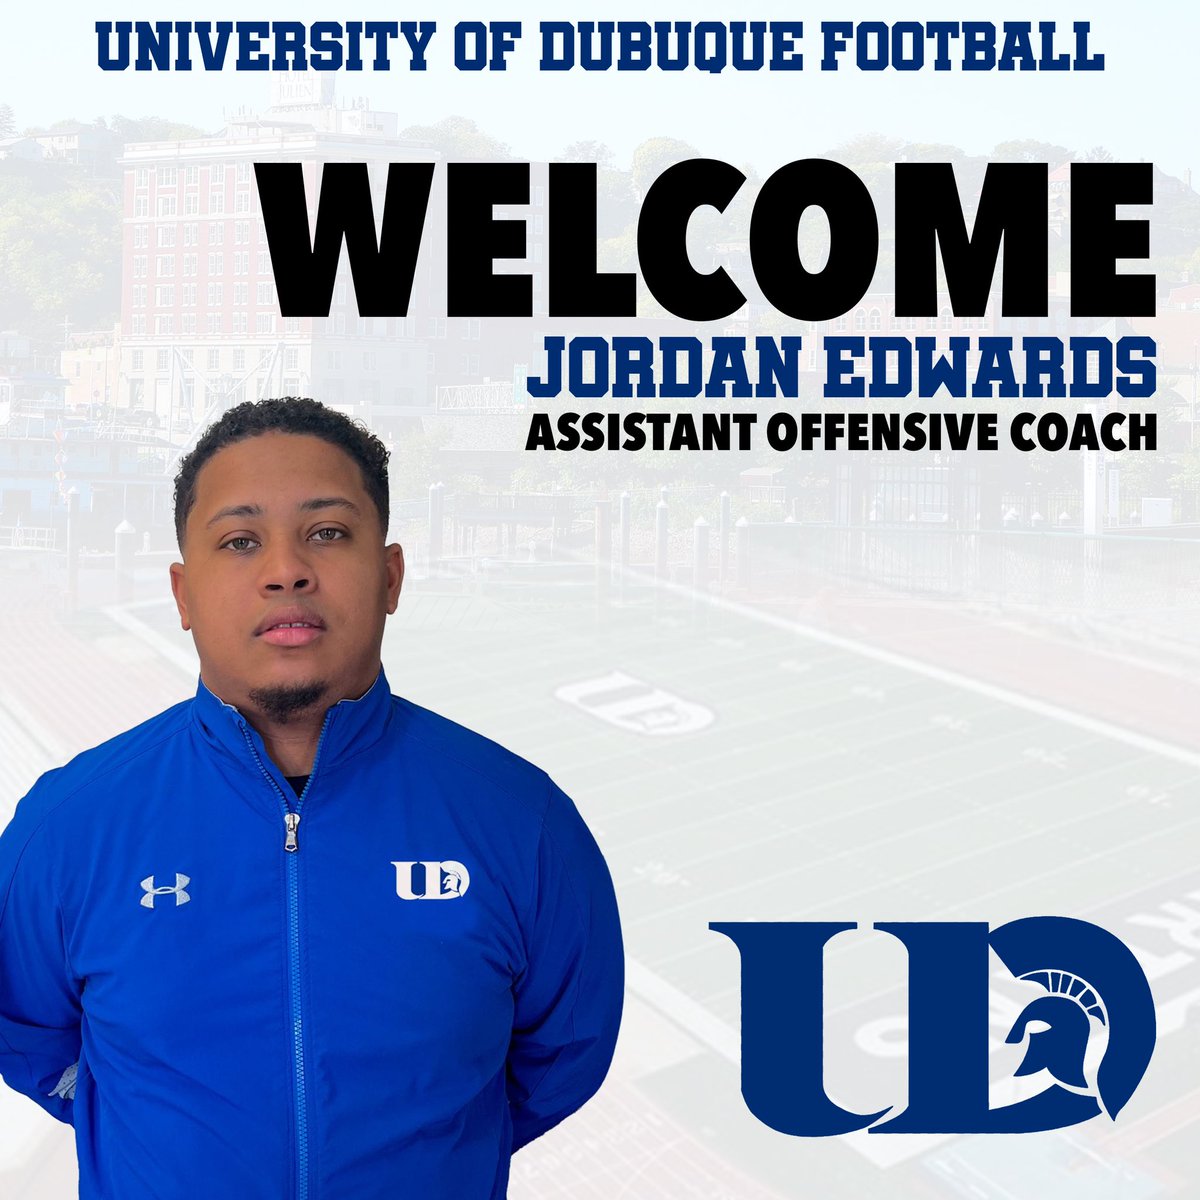 We are excited to announce Jordan Edwards (@CoachEdwardsJ) as a new assistant coach with the program!